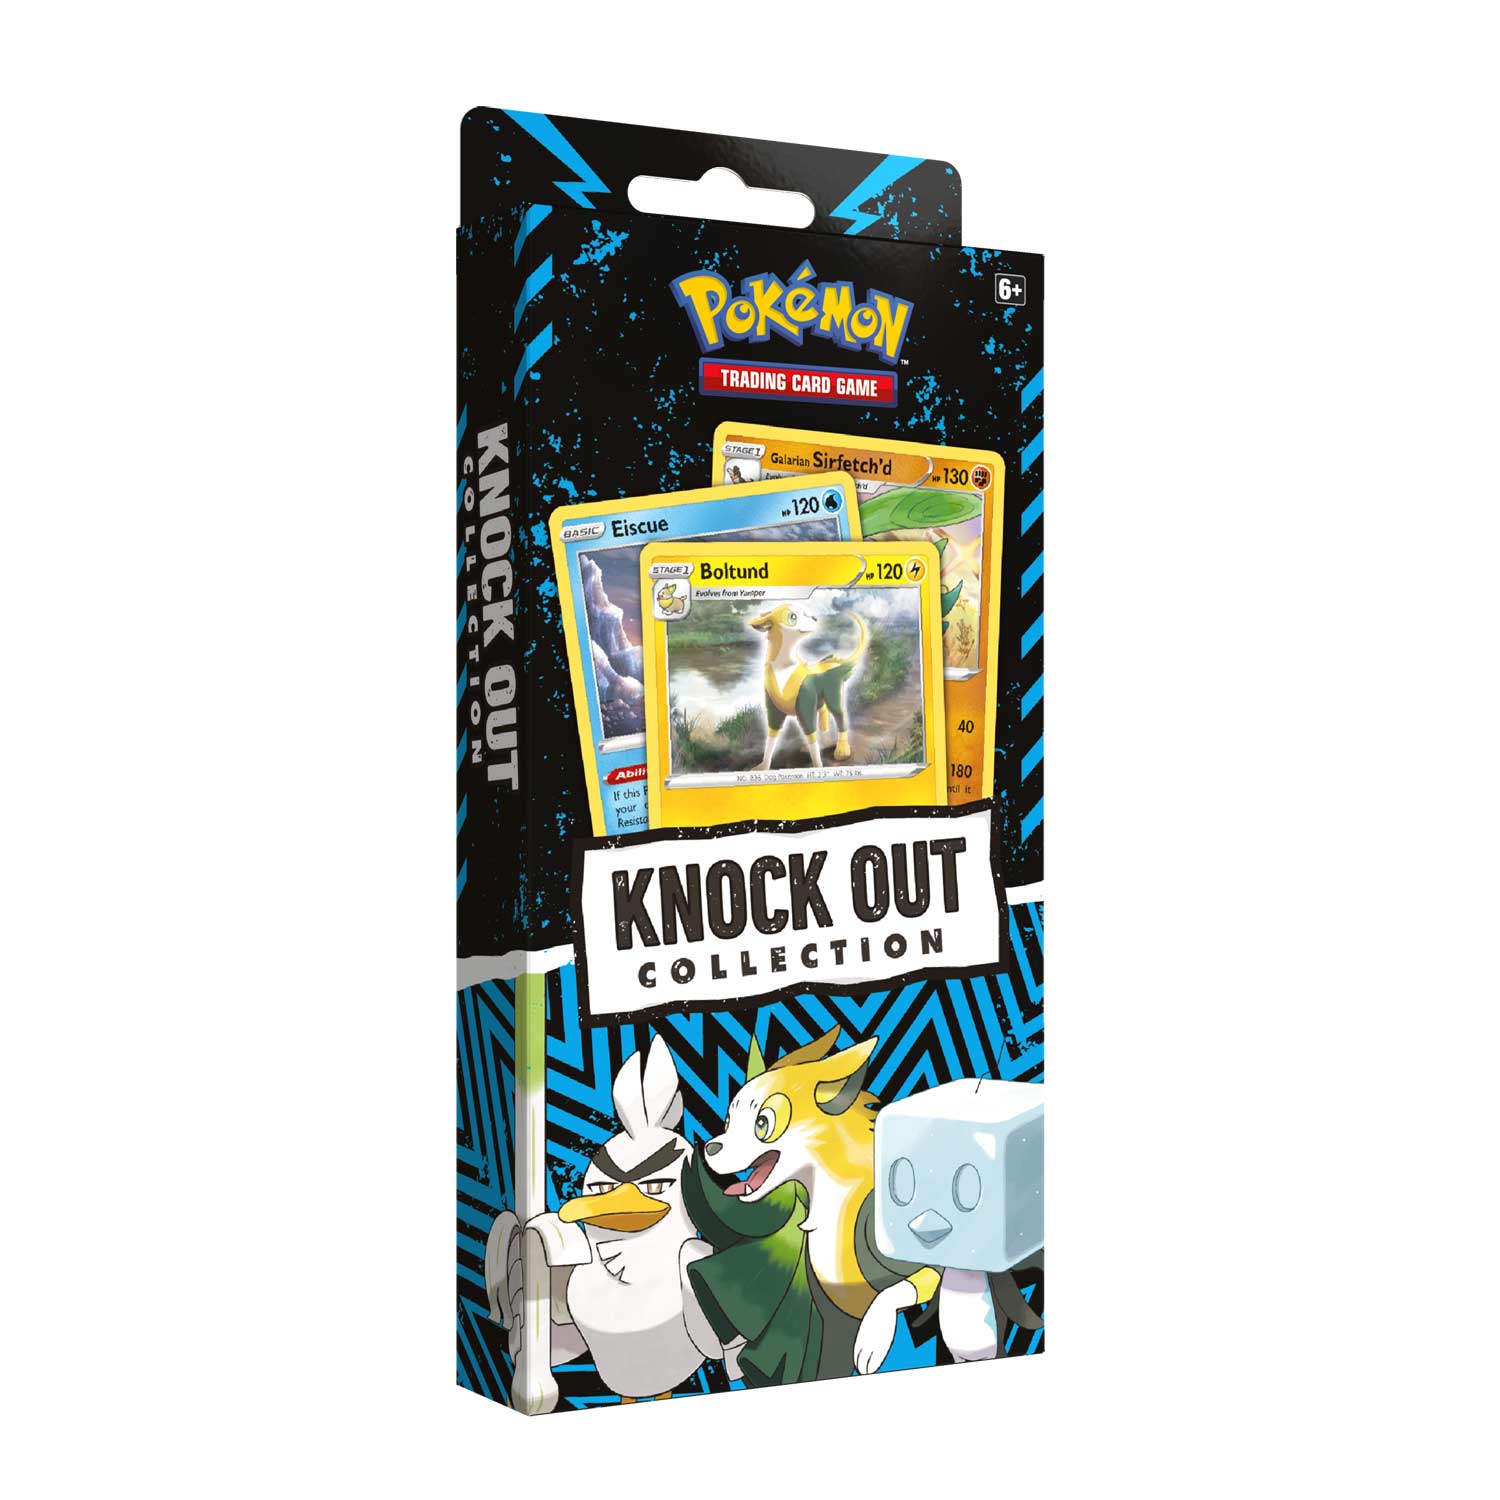 Pokémon - Knock Out Collection (Boltund, Eiscue, Galarian Sirfetch'd) - englisch